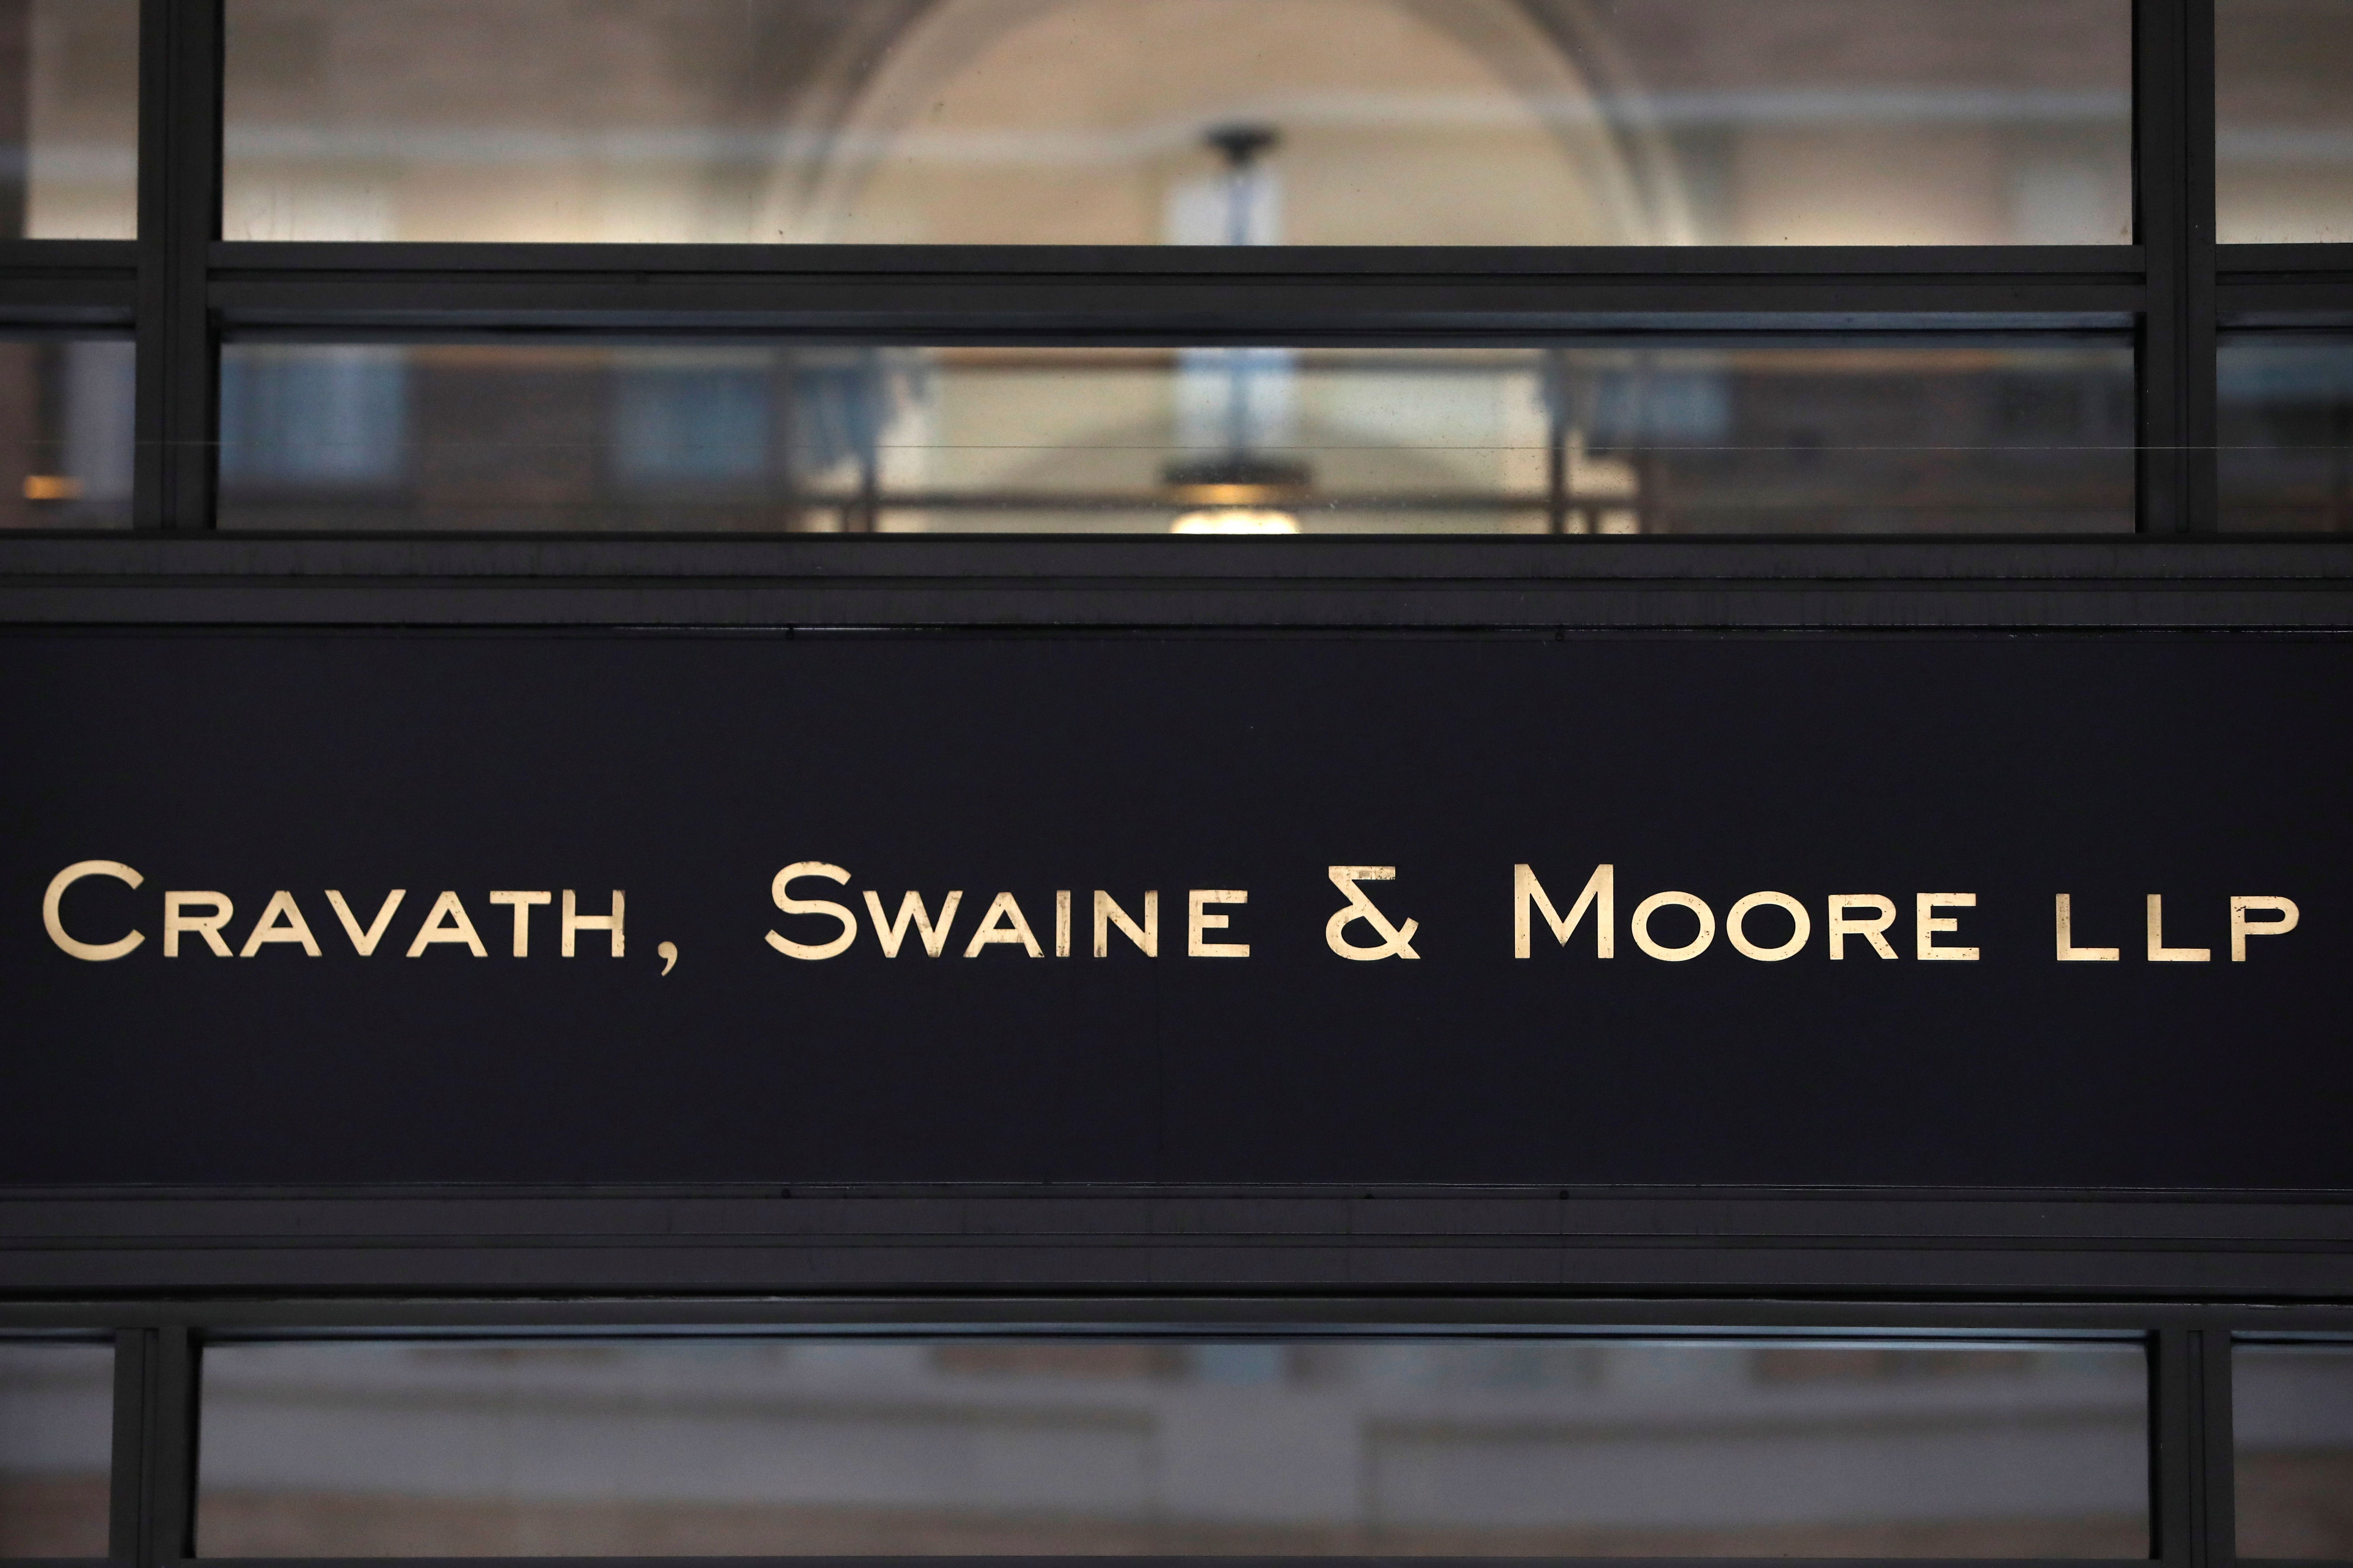 Signage on the exterior of the building where law firm Cravath, Swaine & Moore LLP is located in Manhattan, New York City, U.S., August 17, 2020. REUTERS/Andrew Kelly